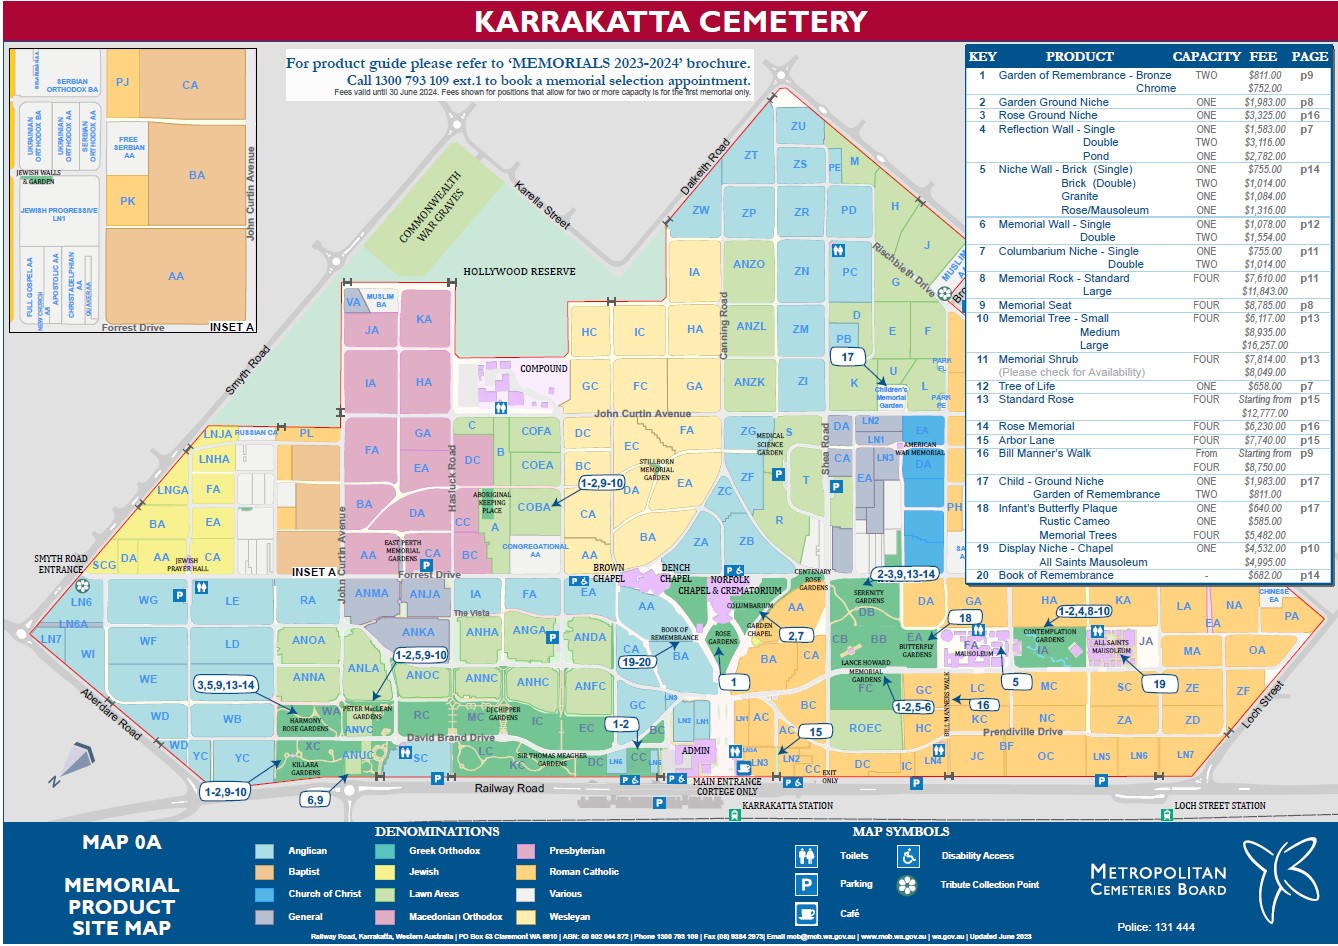 Map 0A Karrakatta Map showing product information available in each section